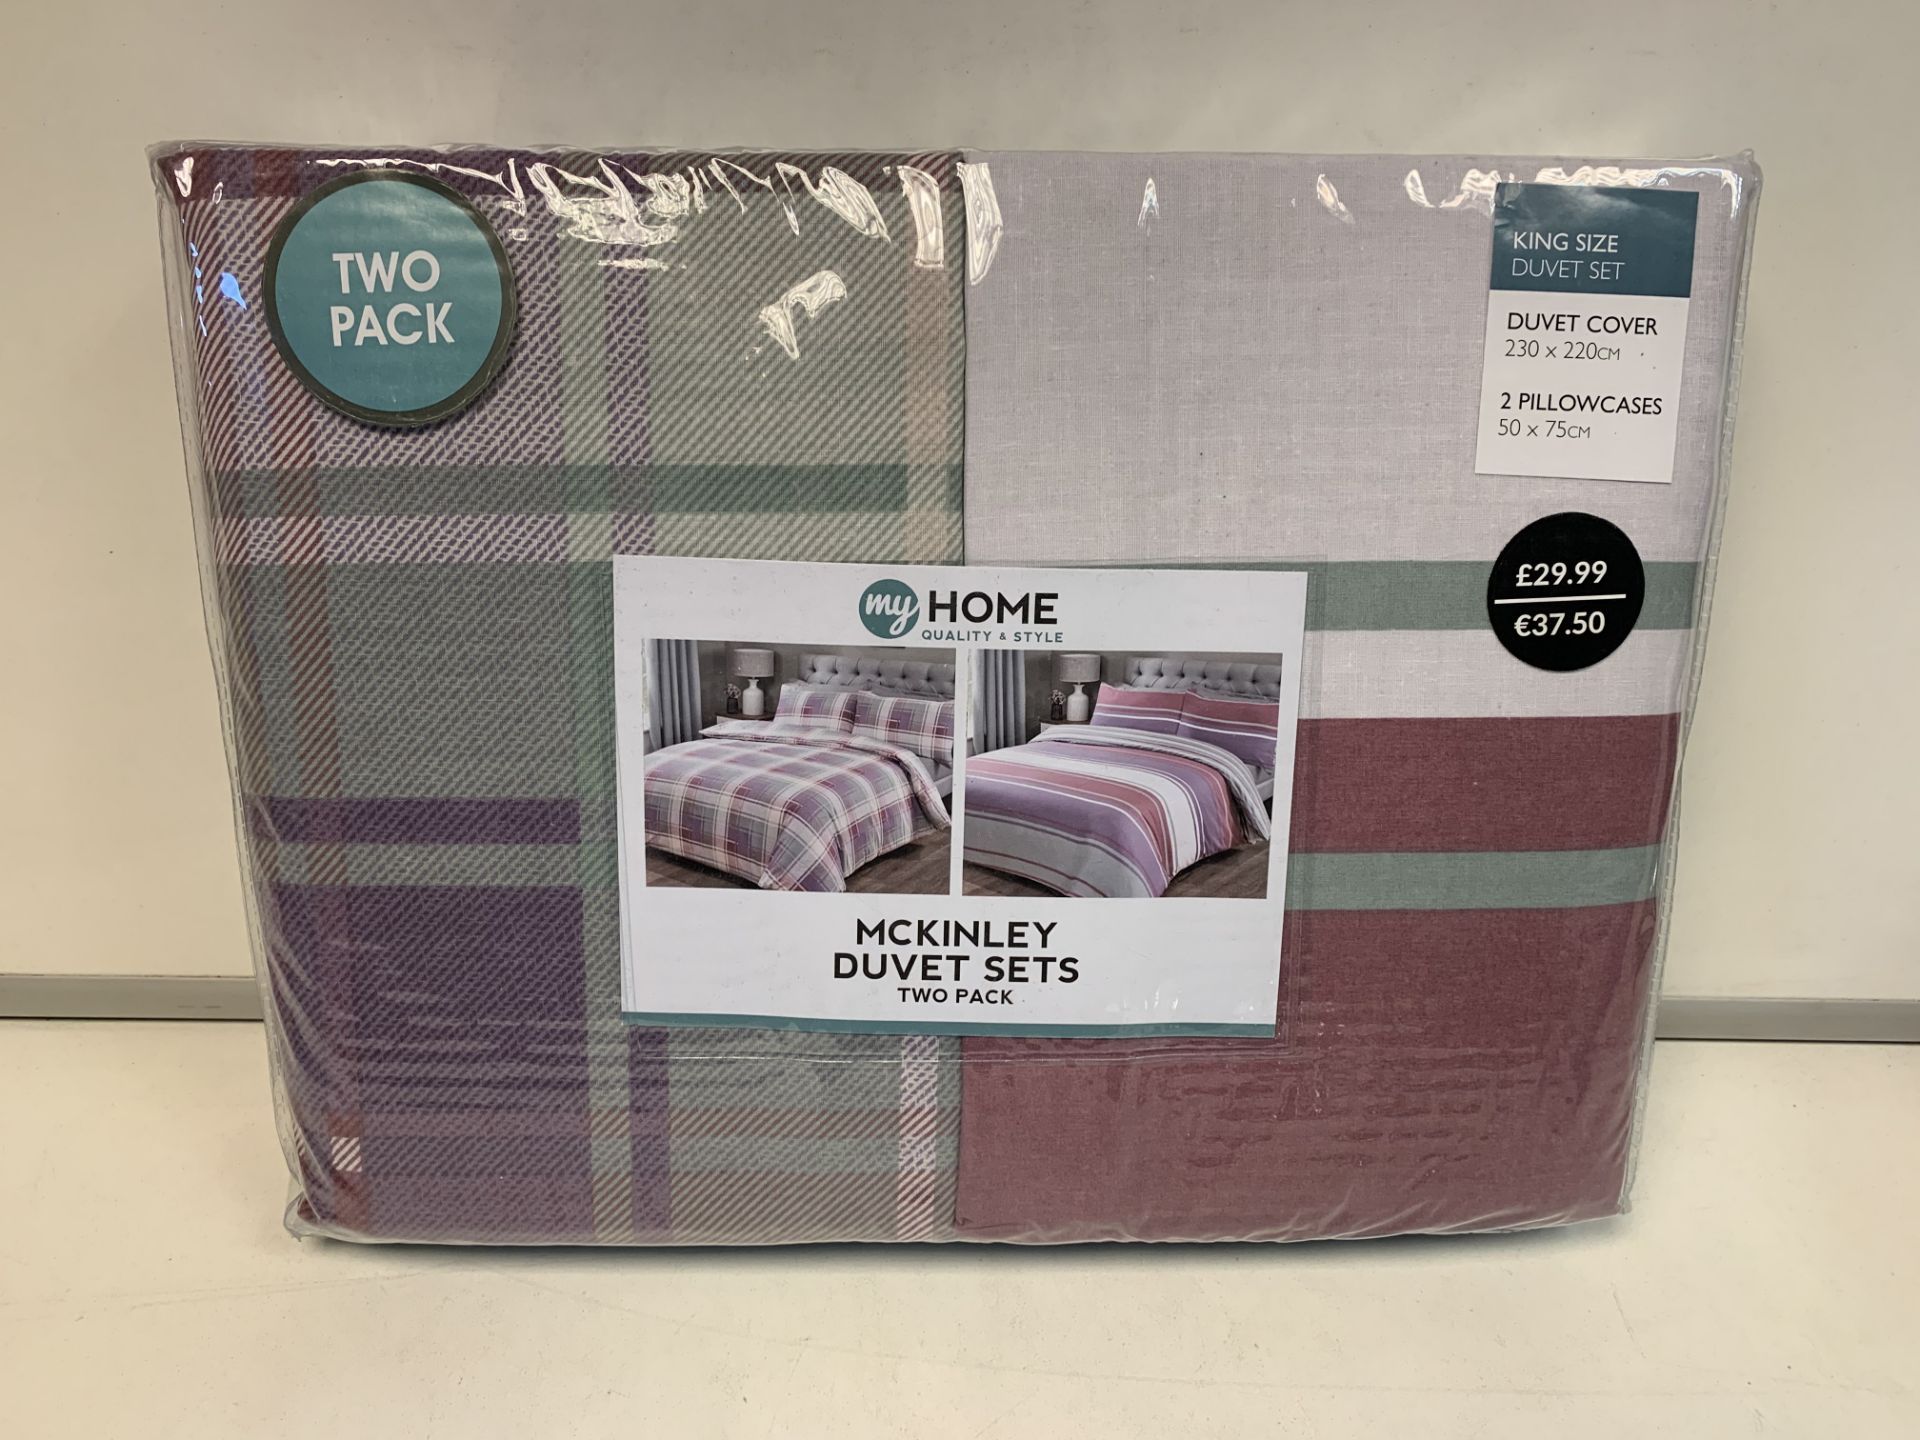 6 X NEW PACKAGED MY HOME PACKS OF 2 MCKINLEY DUVET SETS. KING SIZE (161/13)